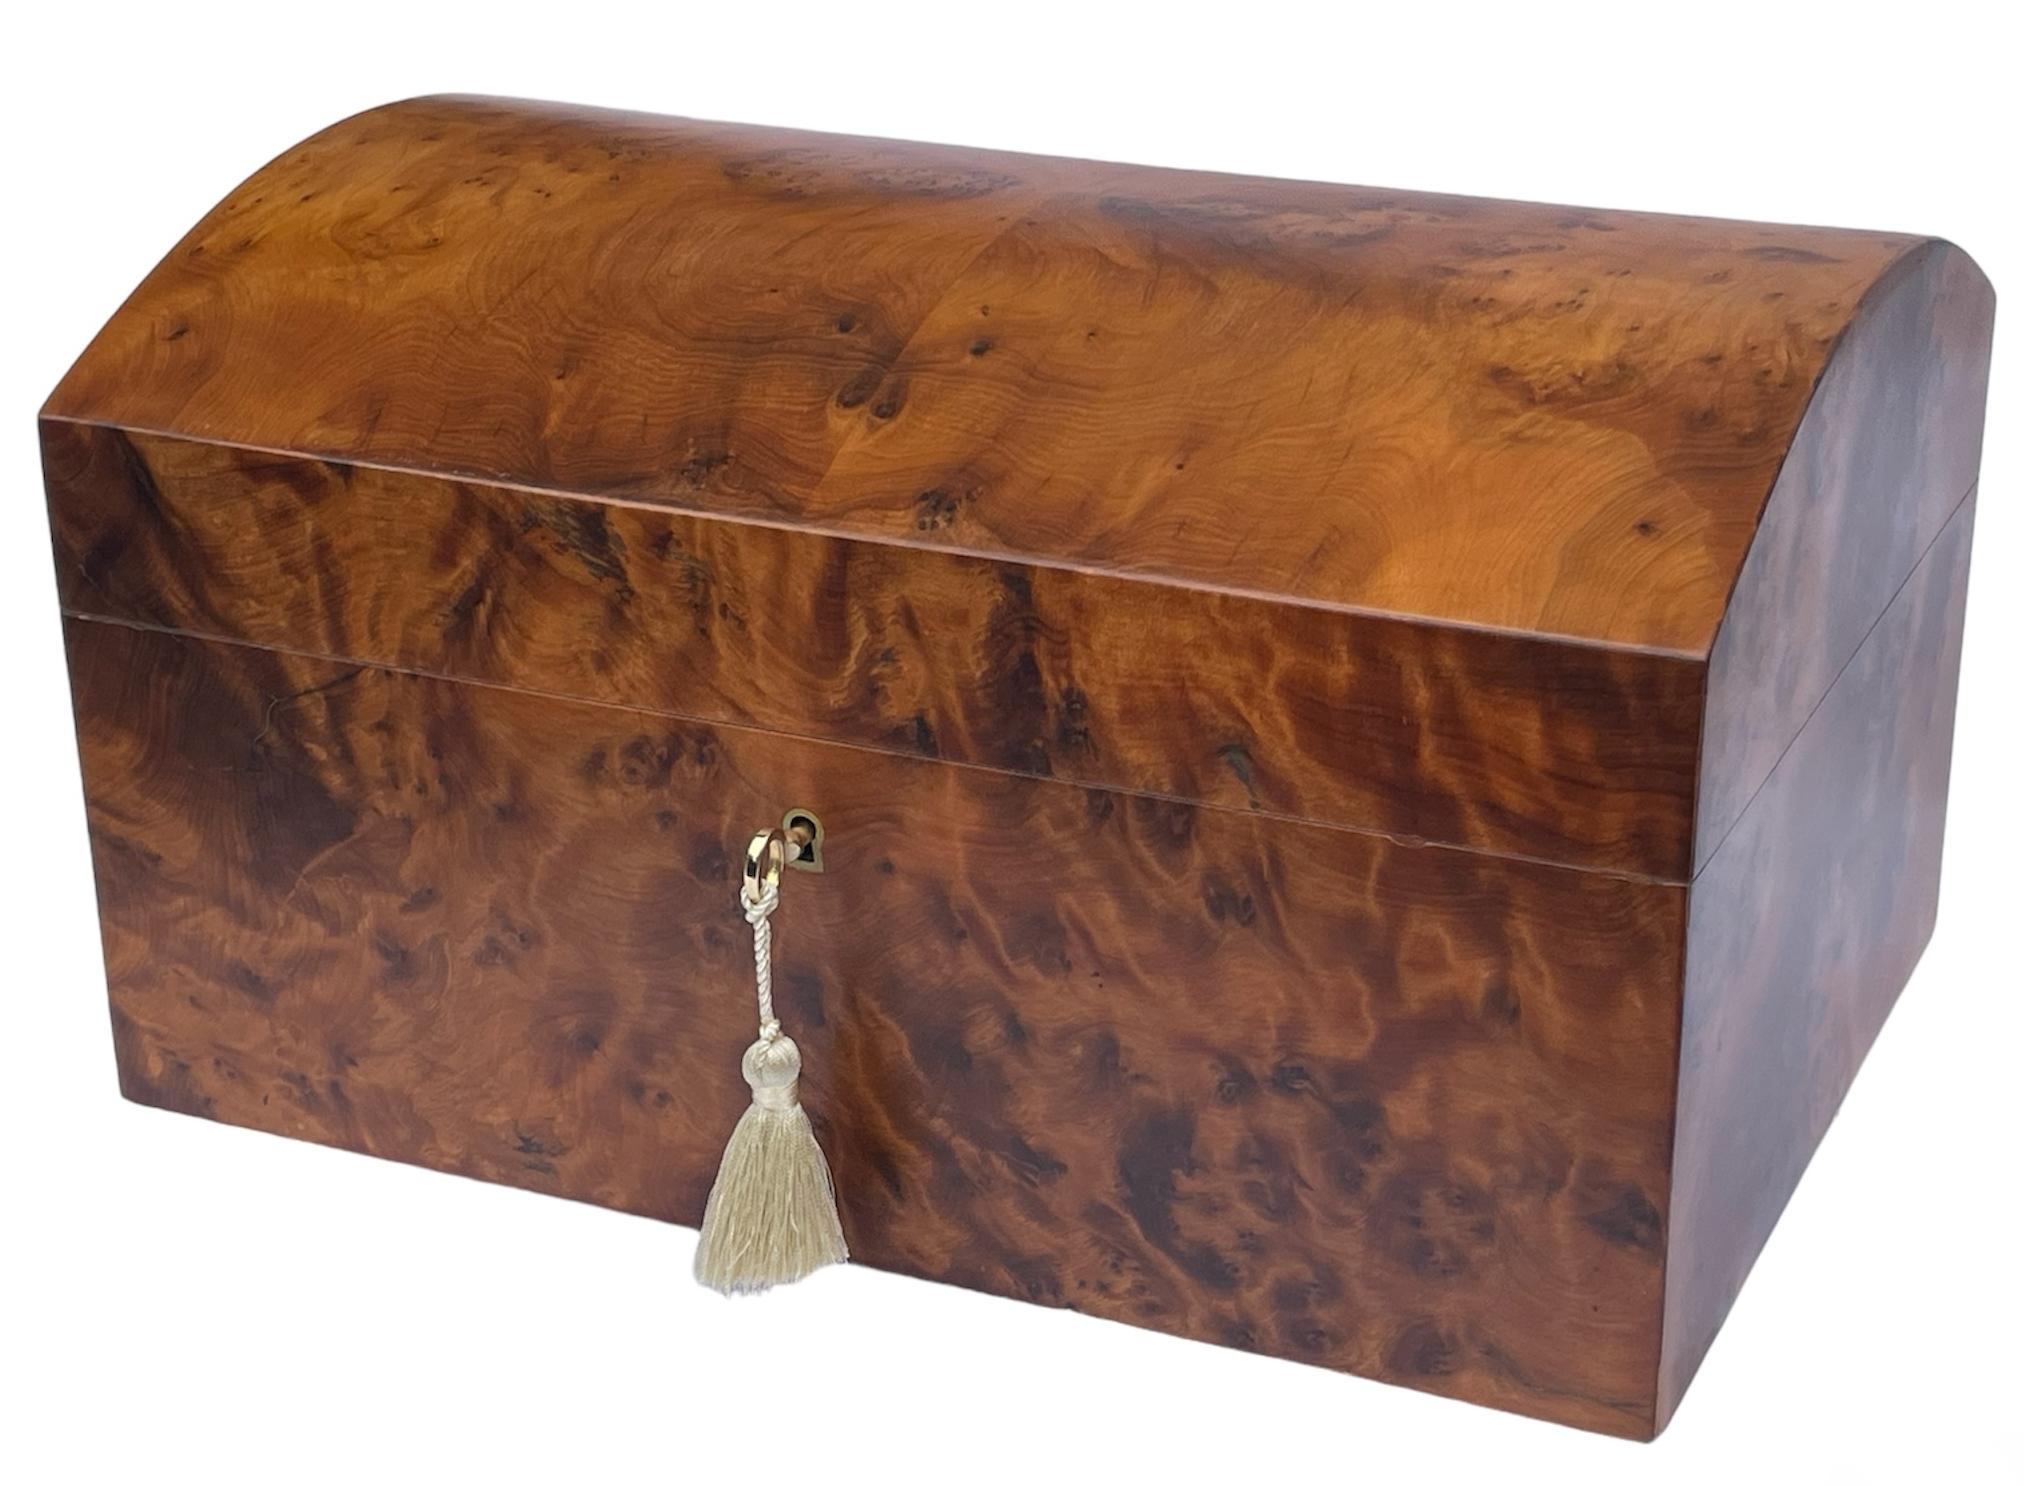 This rare North African Thuya Wood Jewellery Casket was manufactured by the famed manning of Ireland company and is truly a jewel of handcrafted genius. This box is constructed of the finest woods available and the knowledge and skill of 4